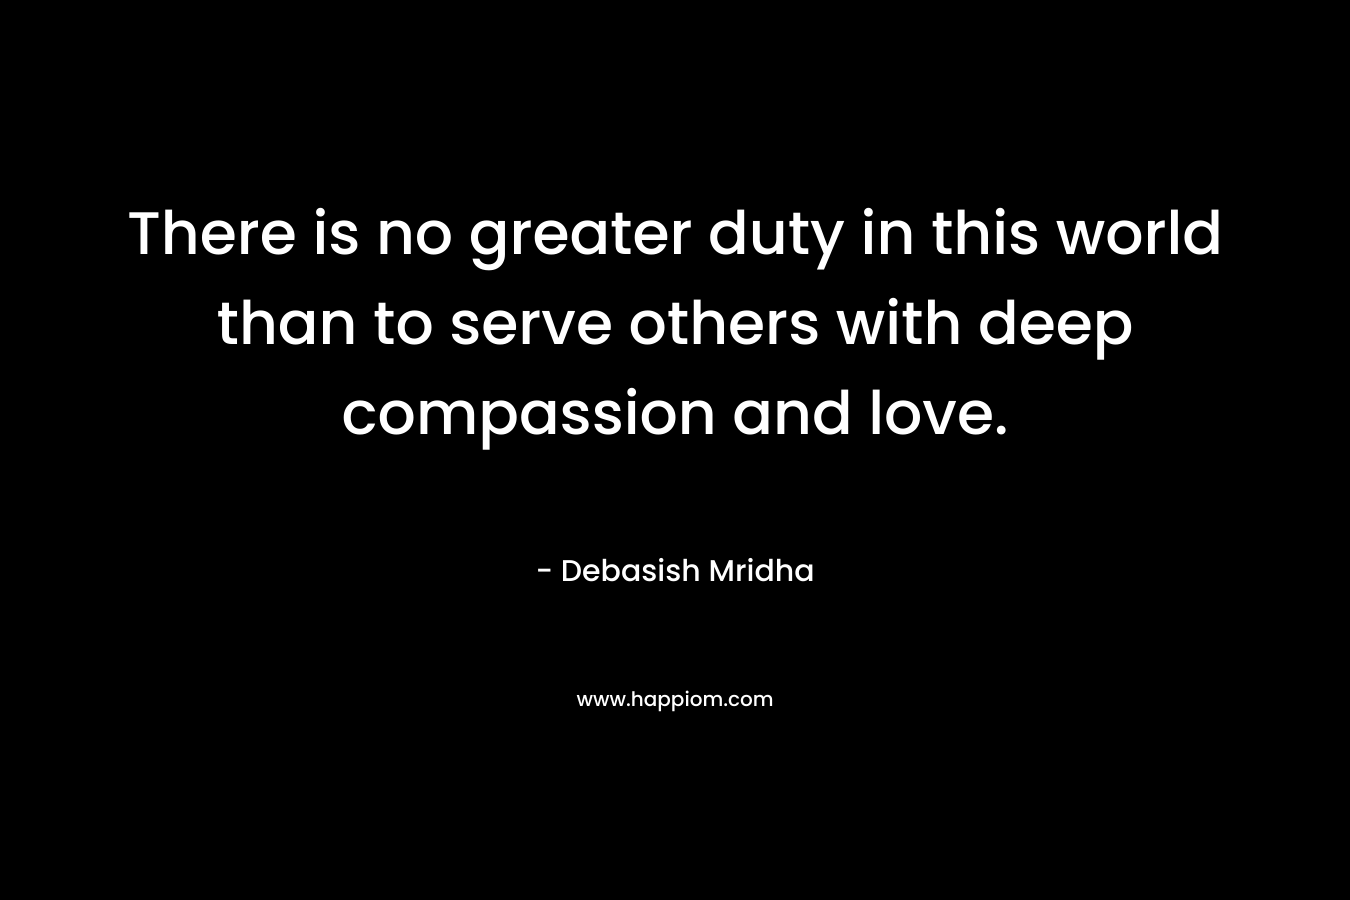 There is no greater duty in this world than to serve others with deep compassion and love.